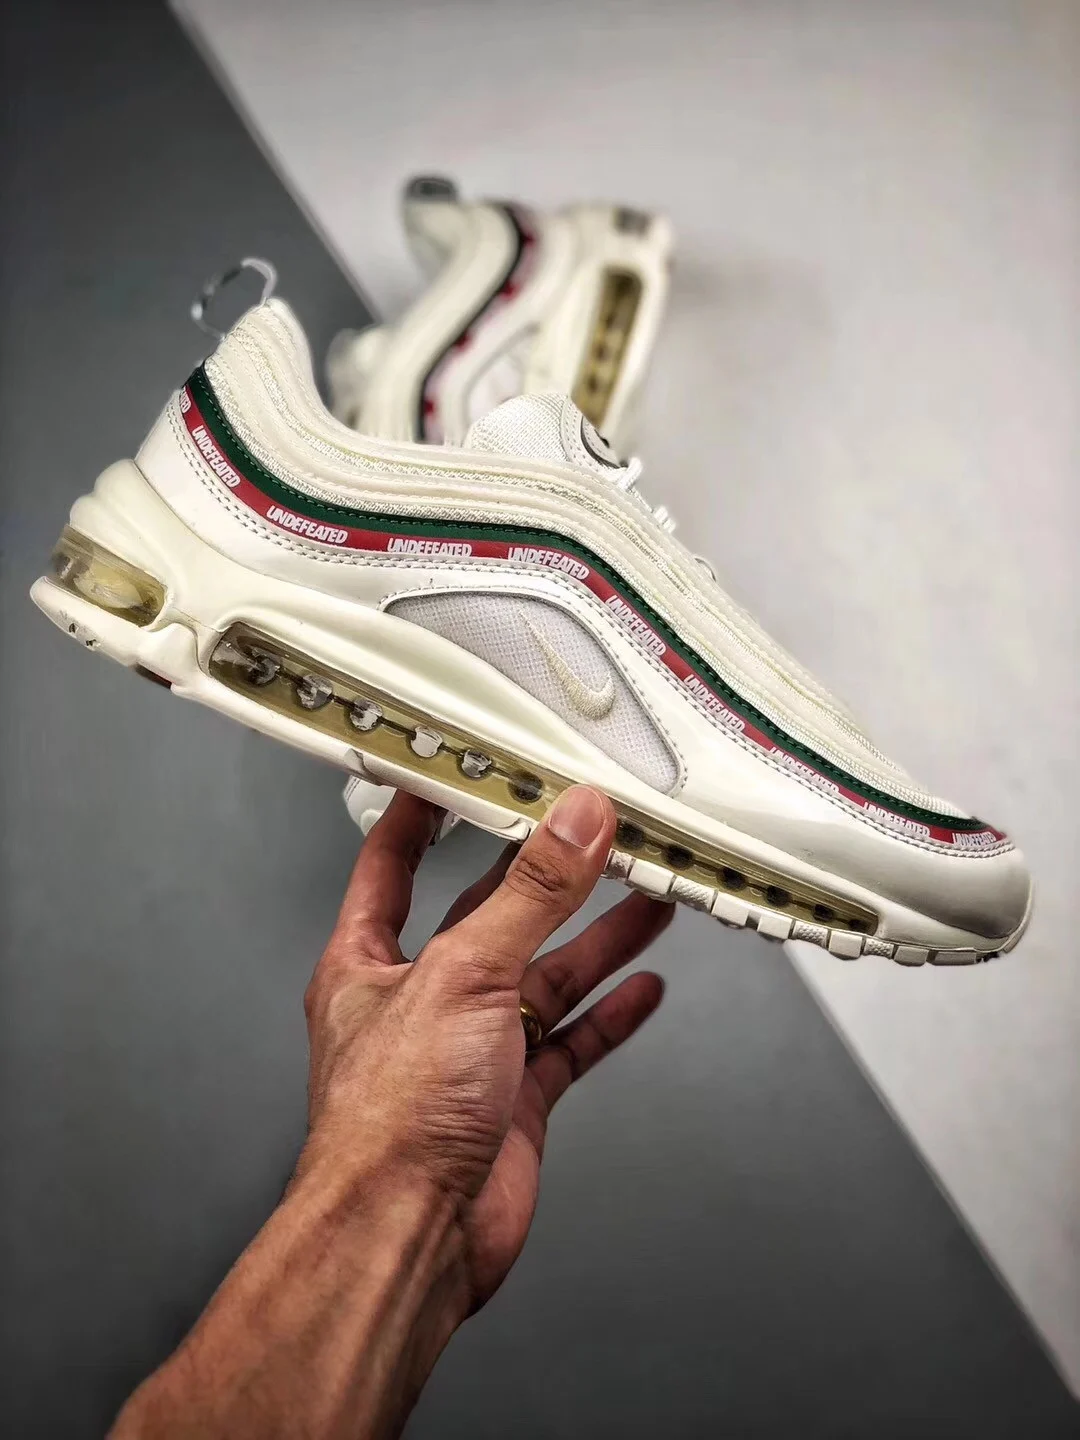 Undefeated x Nike Air Max 97 OG Sail White-Gorge Green-Speed Red On Sale